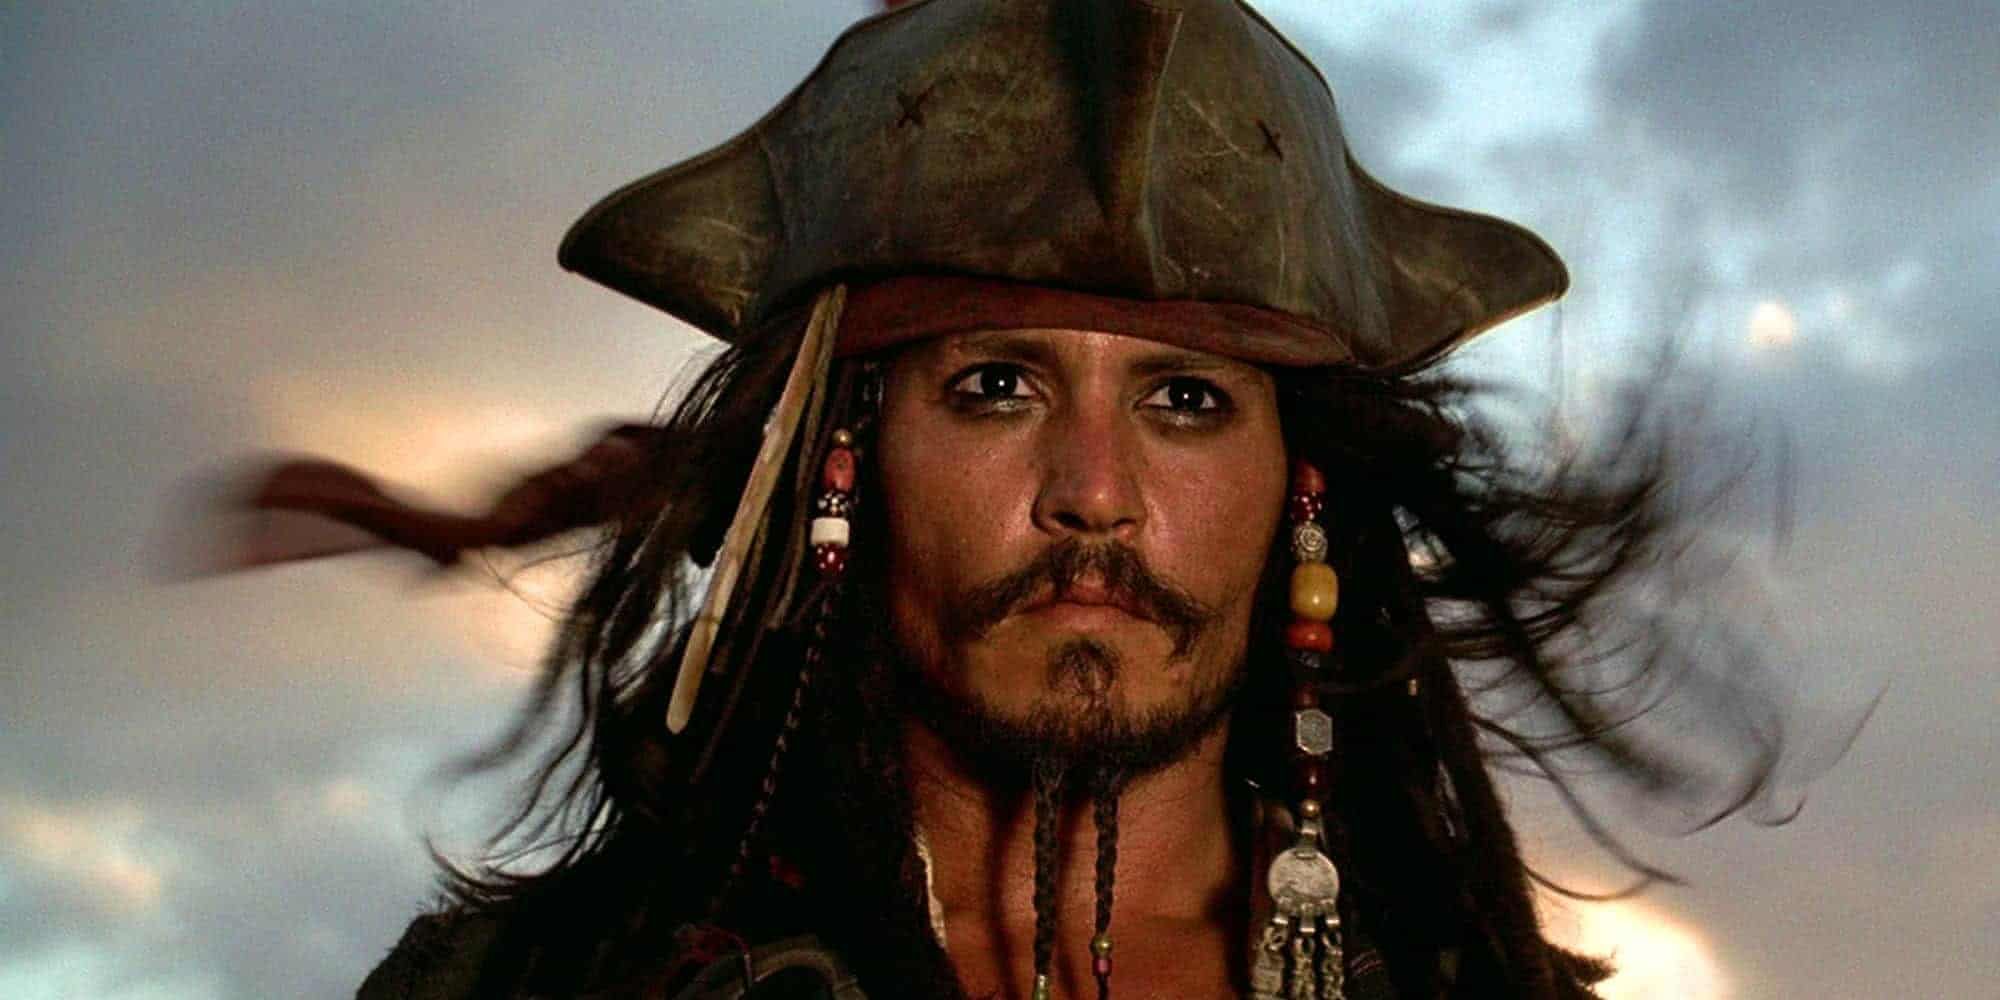 Captain Jack Sparrow, played by Johnny Depp.